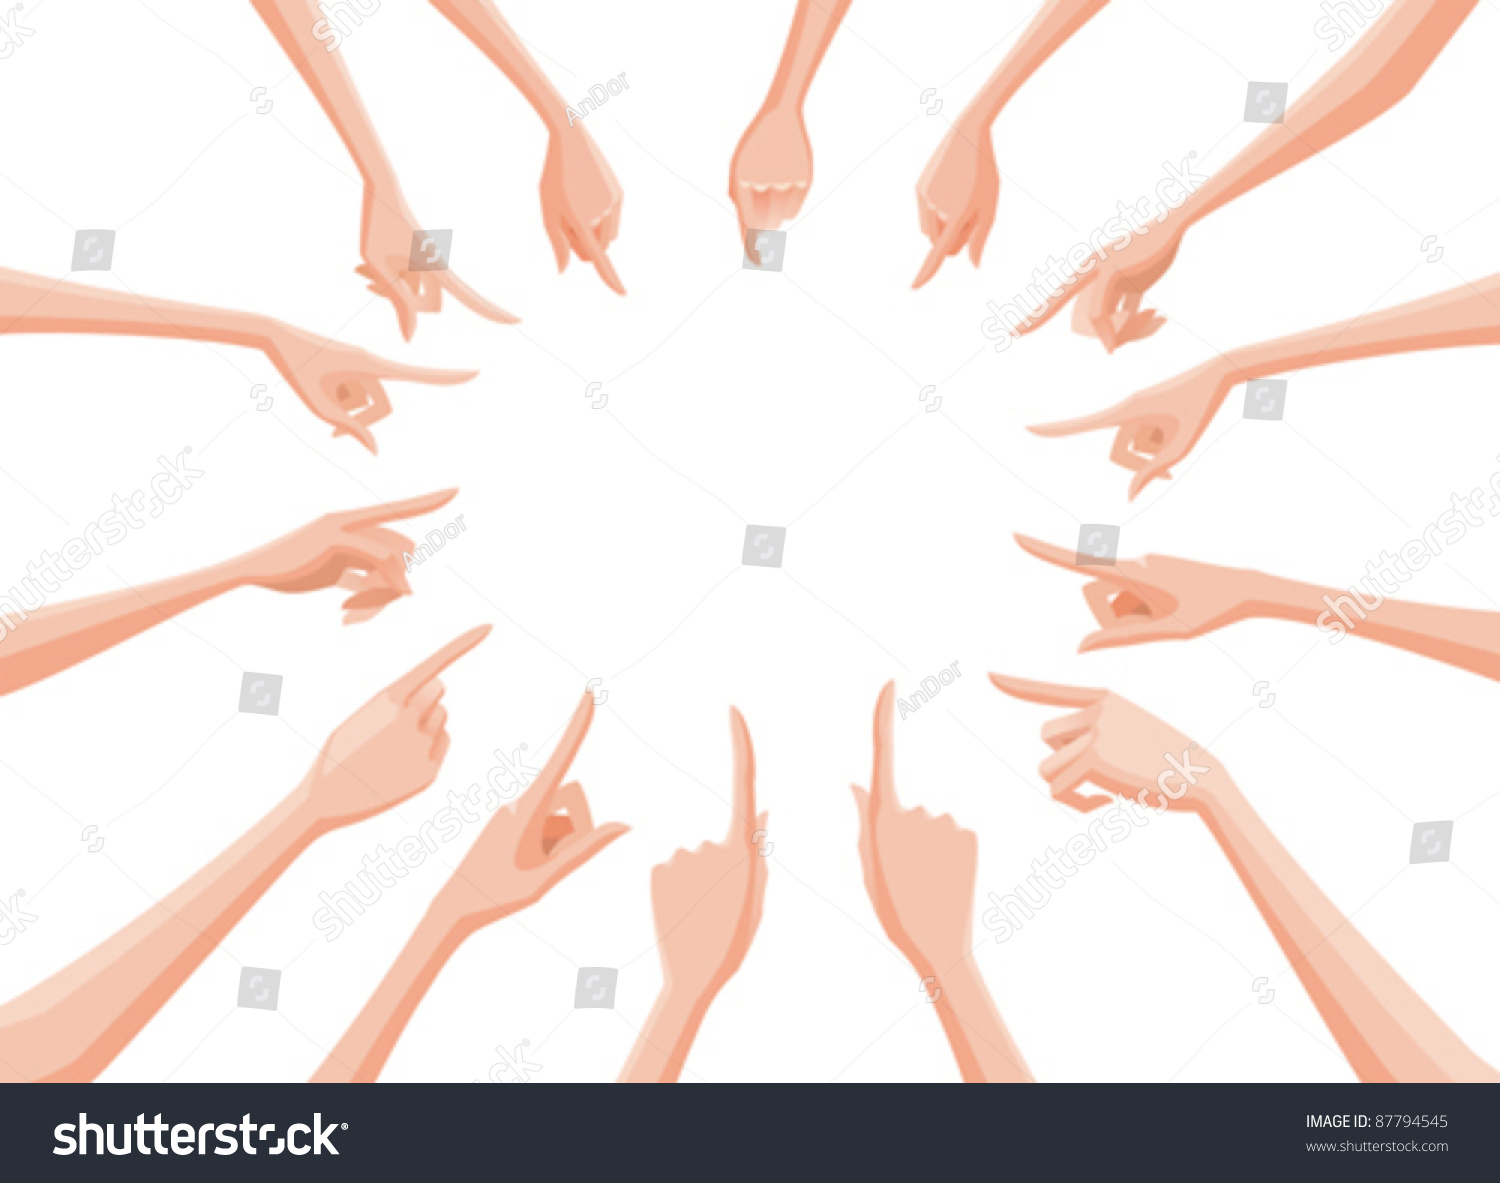 Bare Female Hands In Circle Pointing To Its Center Stock Vector ...